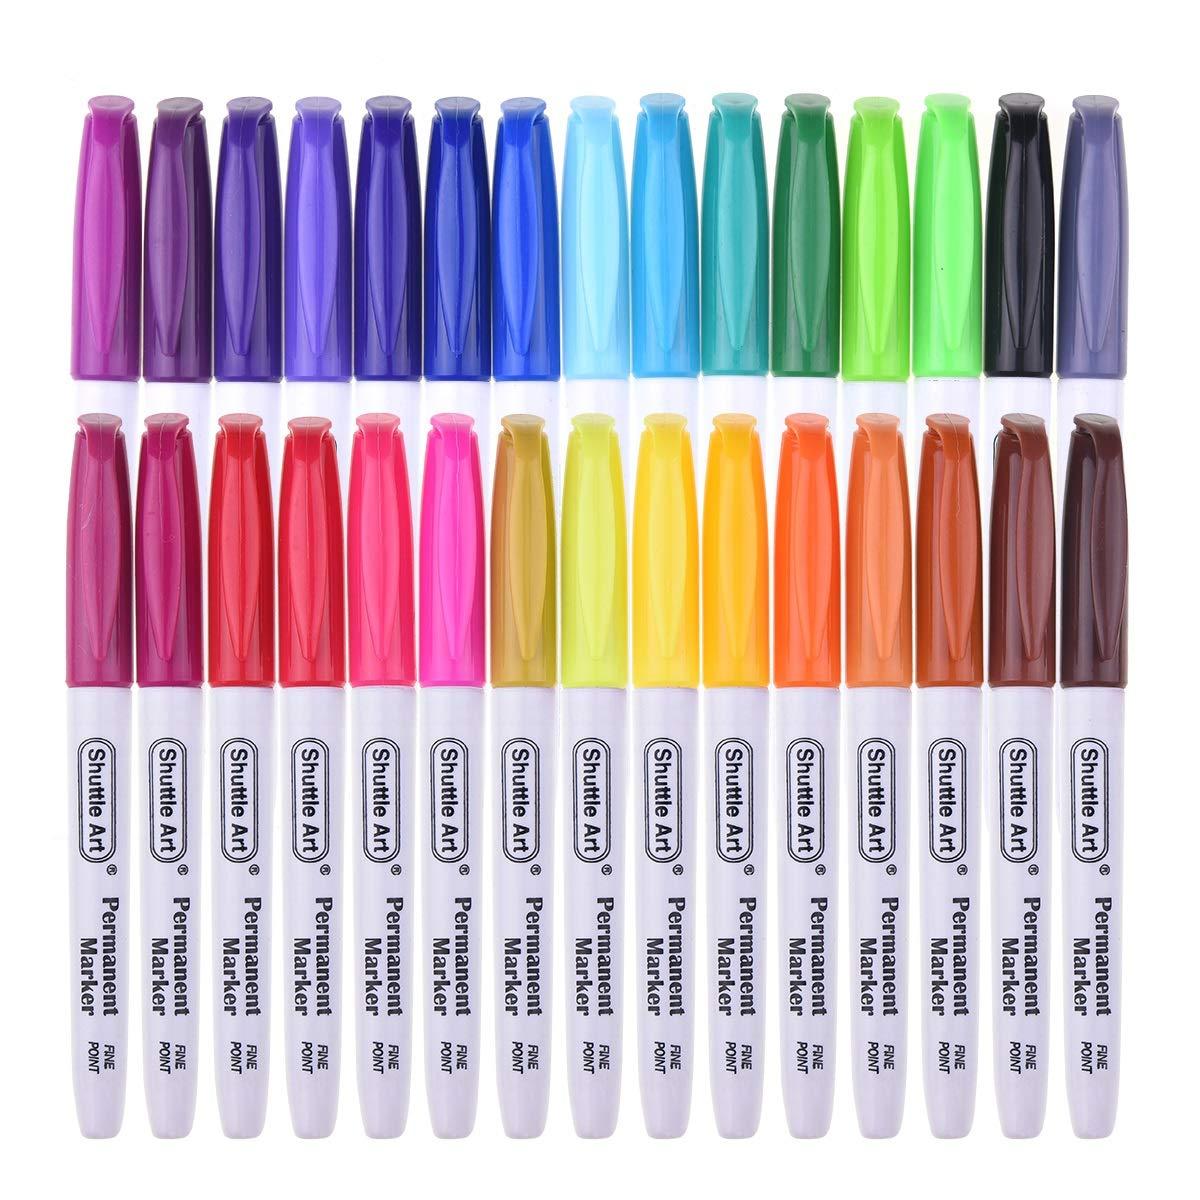 Works on Plastic,Wood,Stone,Metal and Glass for Doodling Marking Permanent Markers,Shuttle Art 50 Pack Black Permanent Marker set,Fine Point